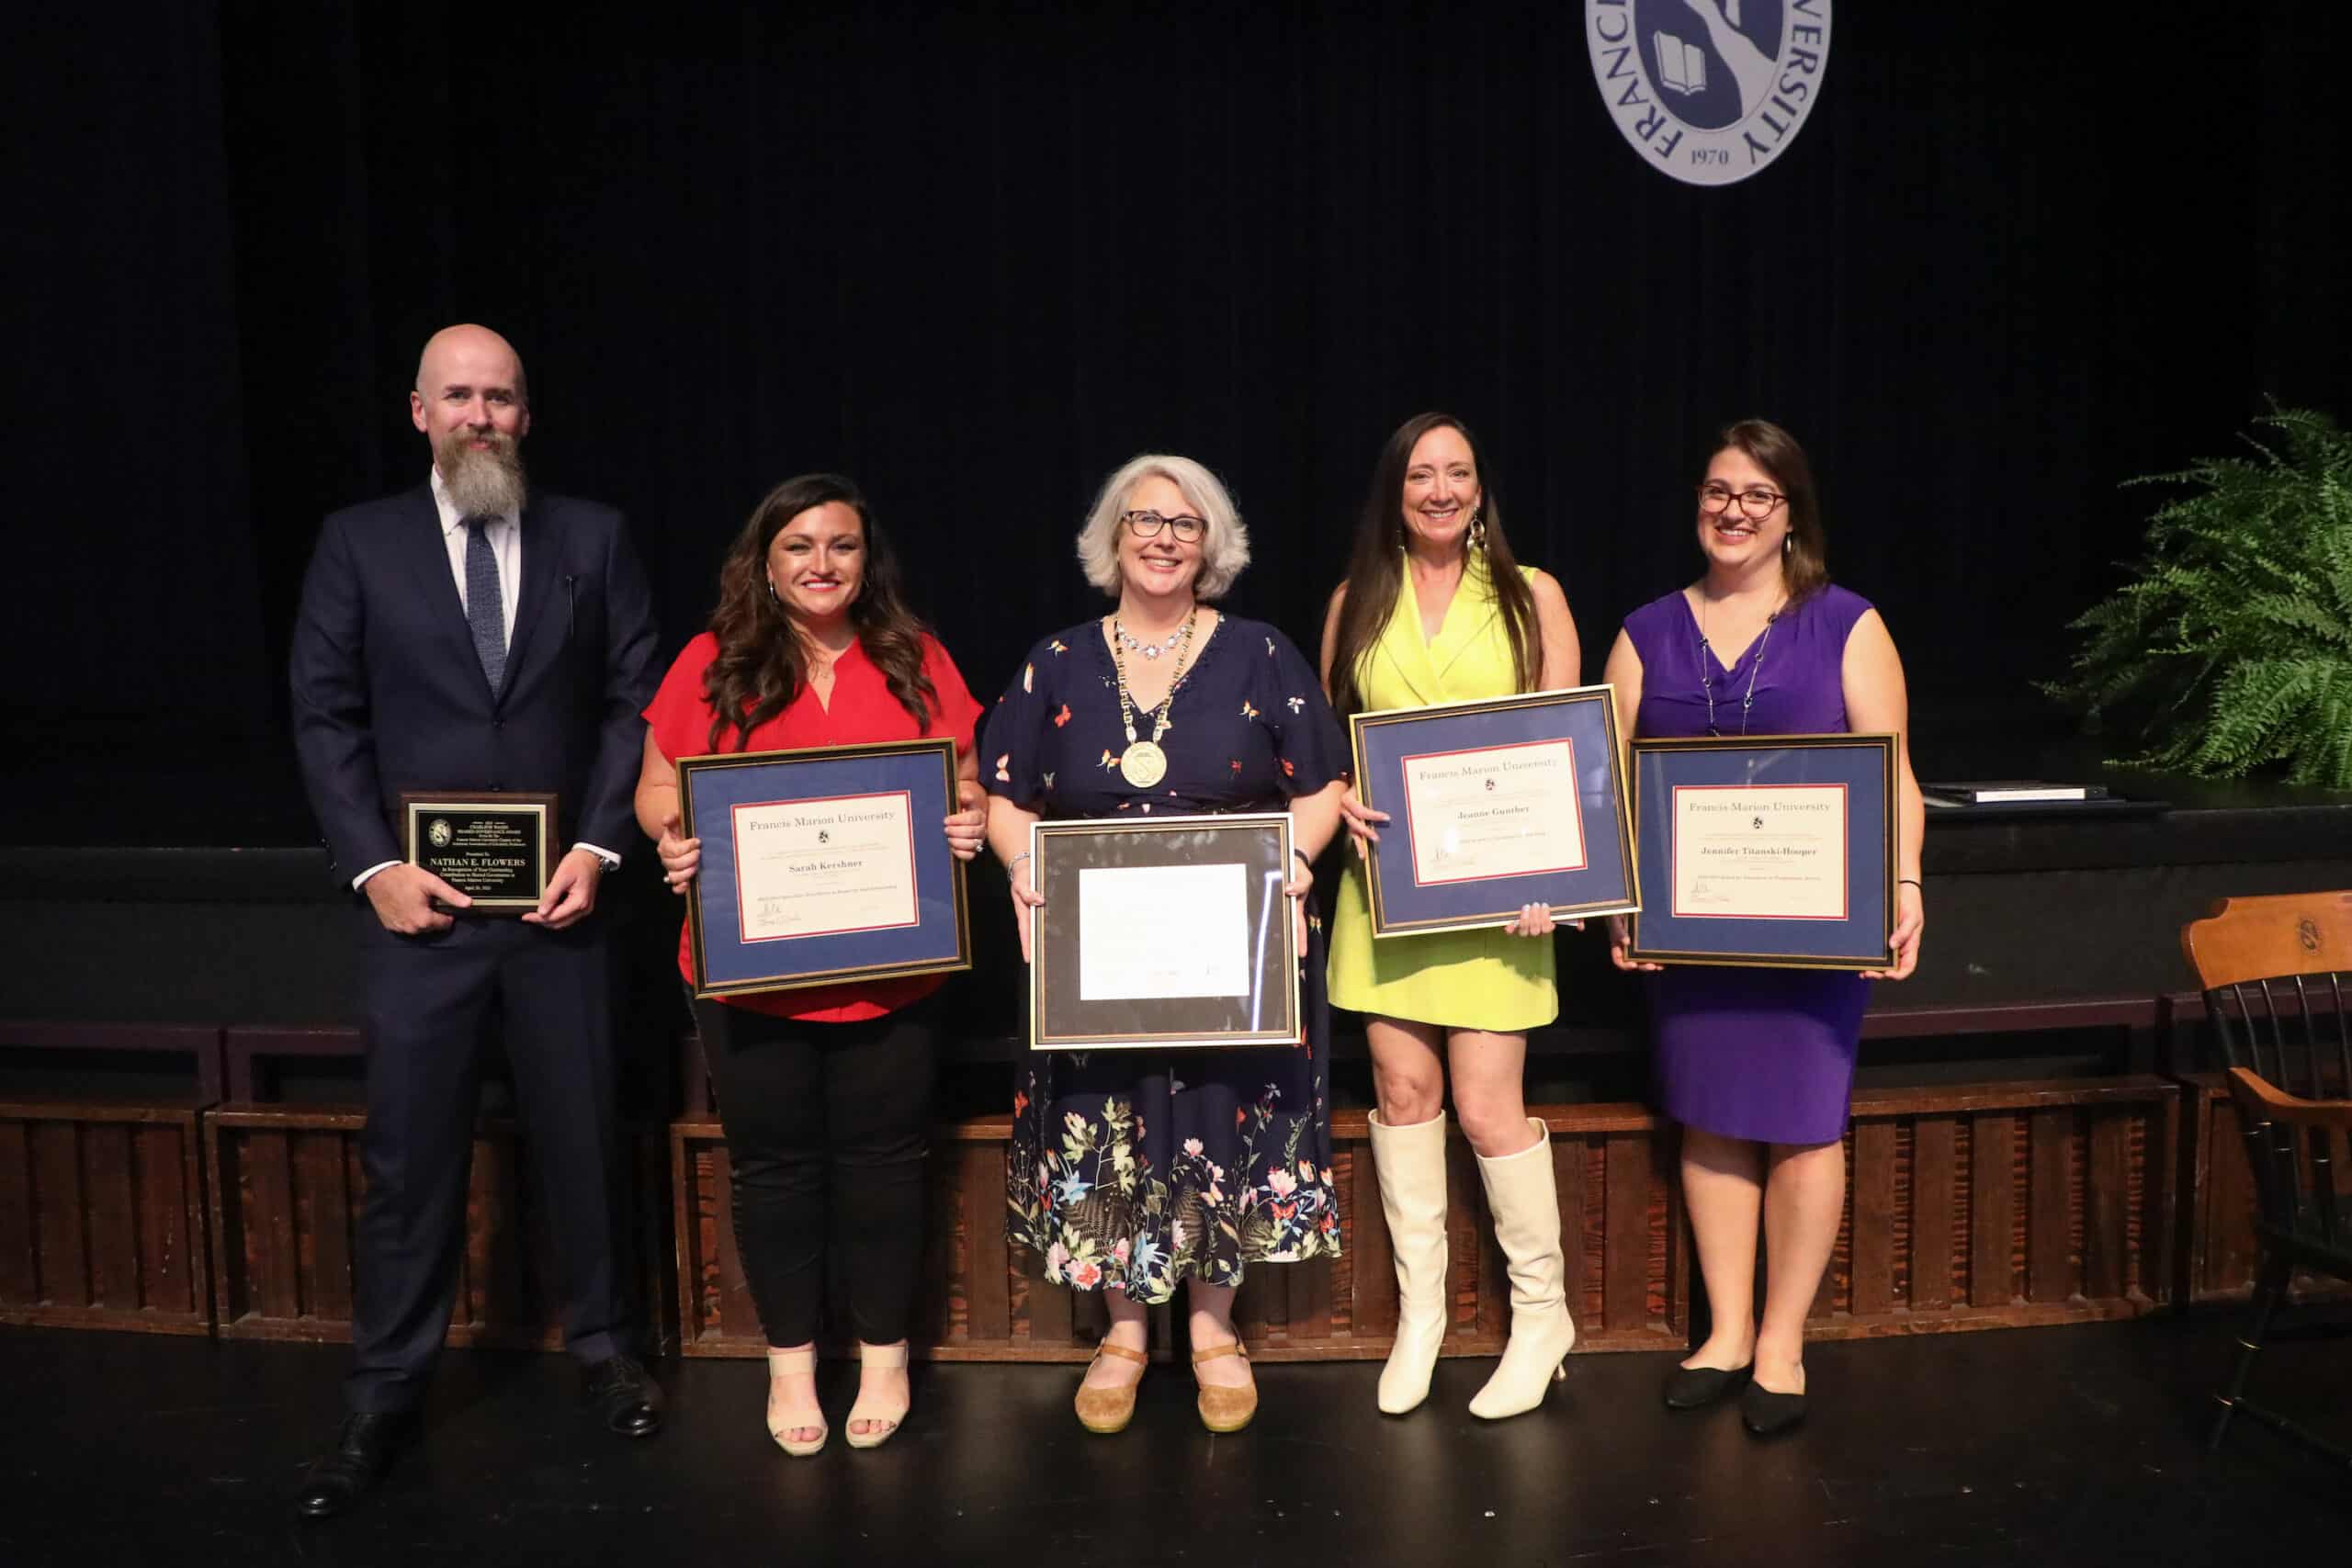 FMU Faculty Recognized During Annual Awards Ceremony